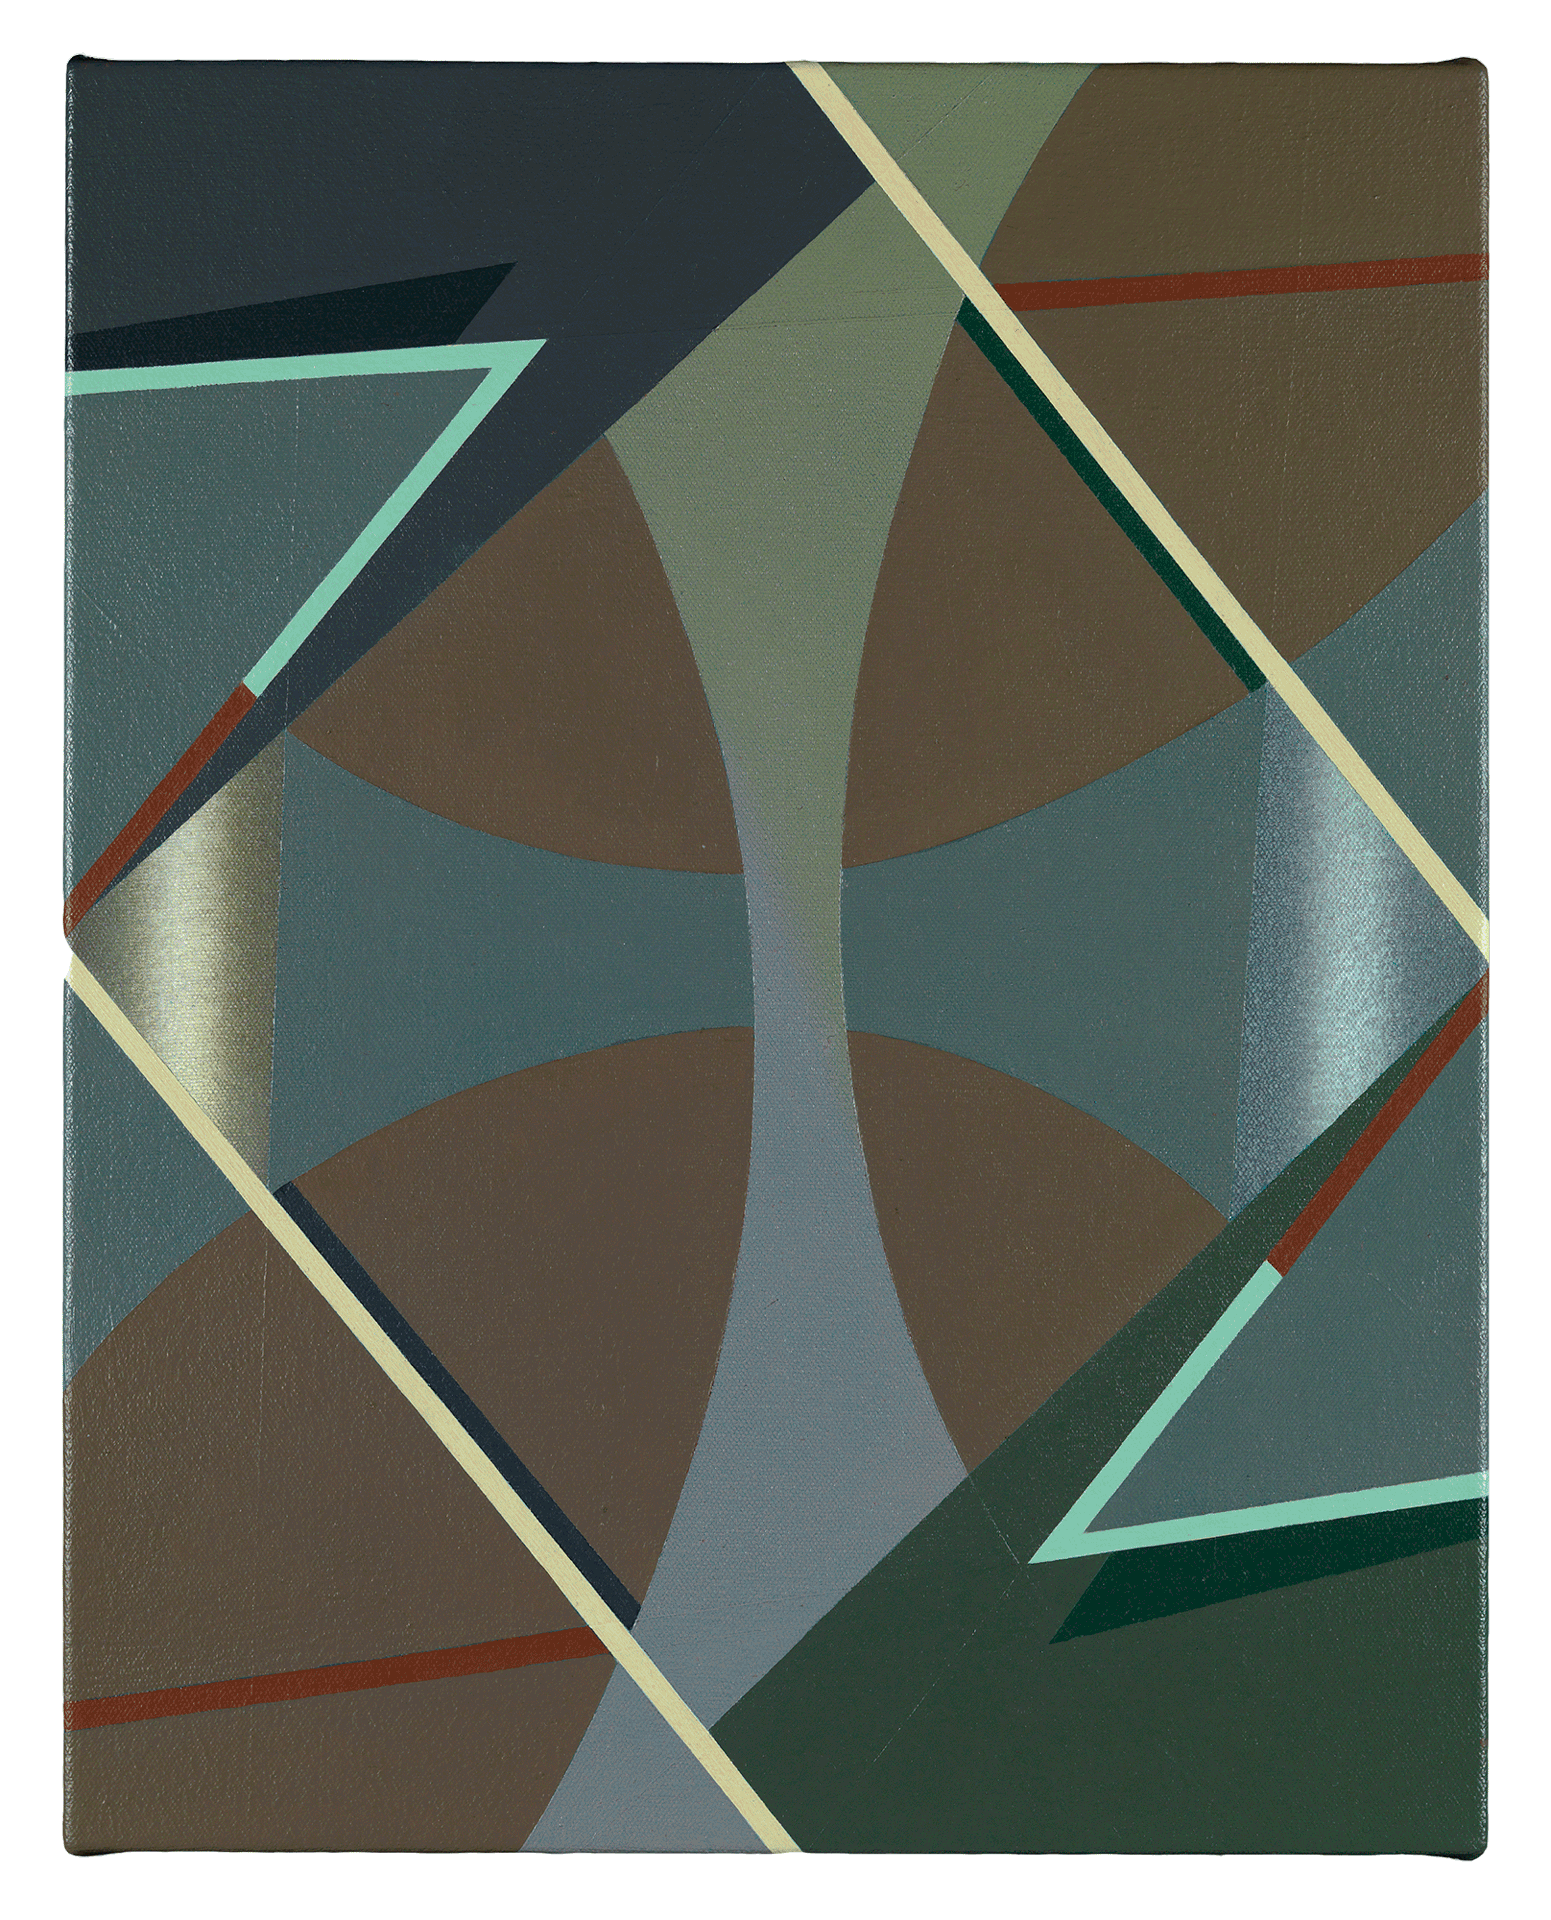 A painting by Tomma Abts, titled Voke, dated 2013.